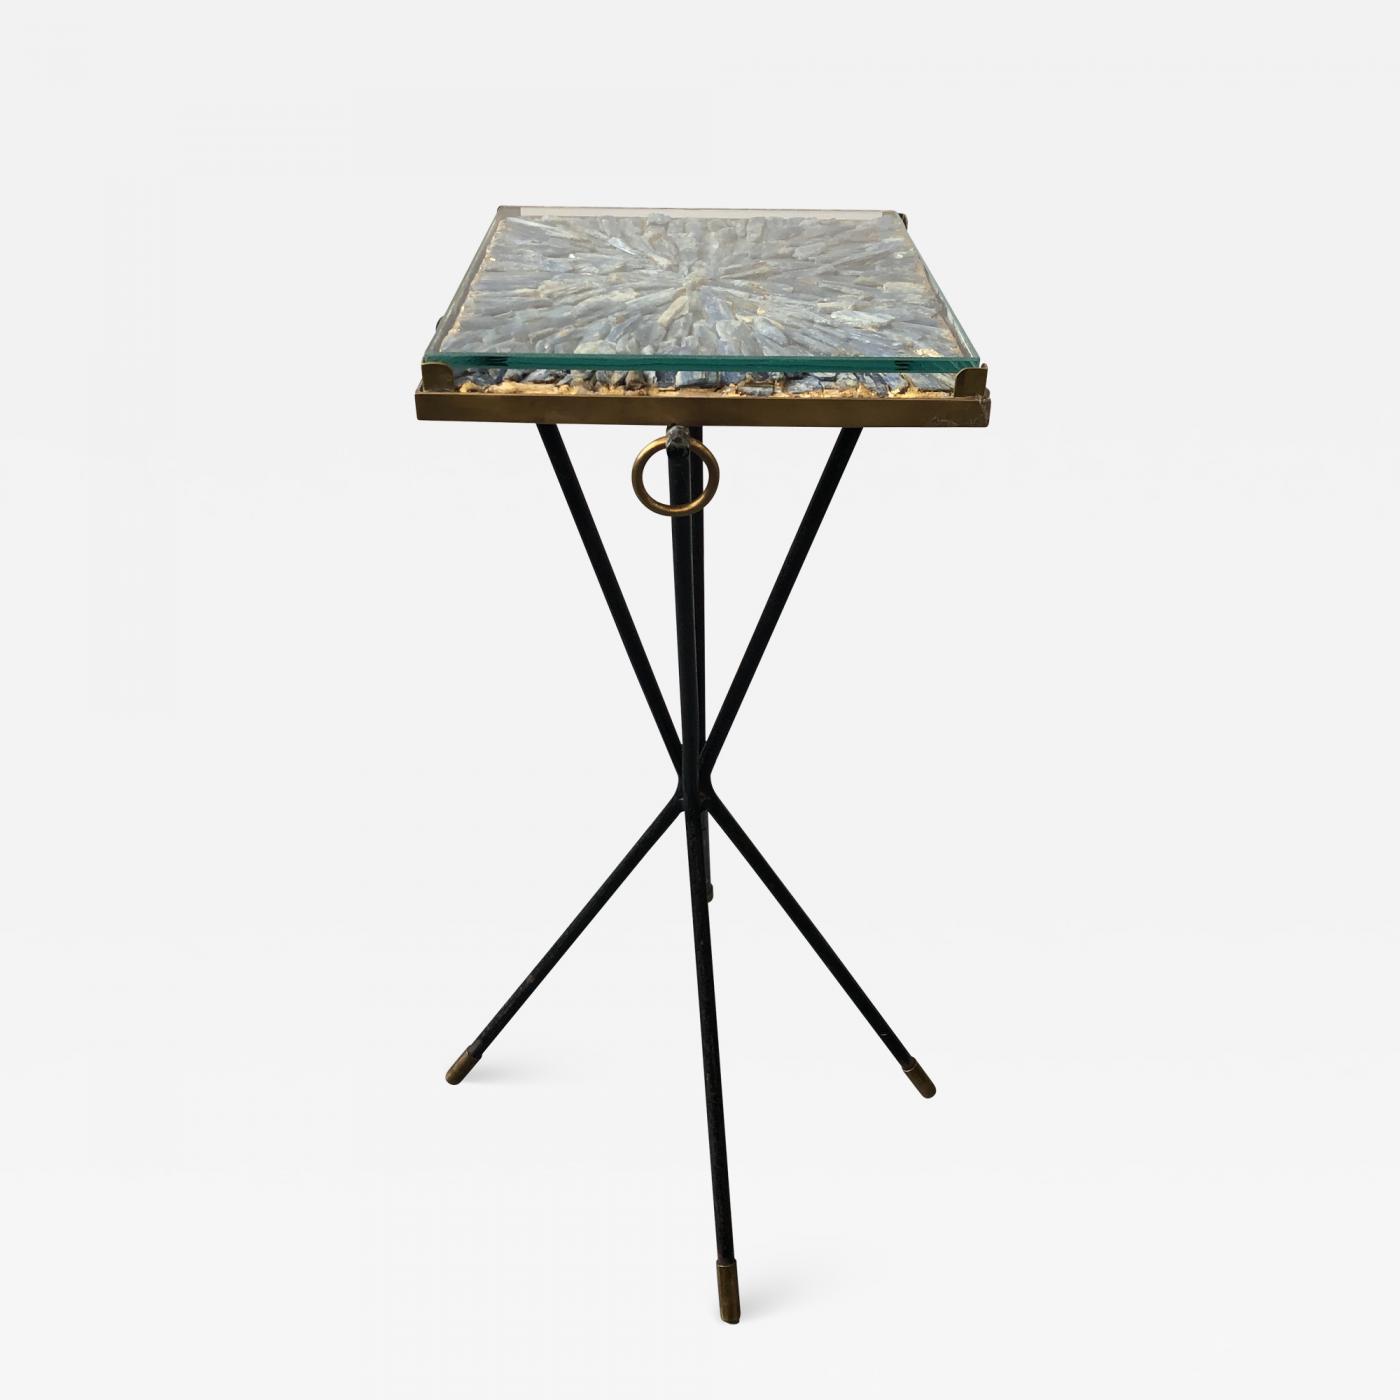 Italian side table, bronze details supporting a blue Kyantine stone top